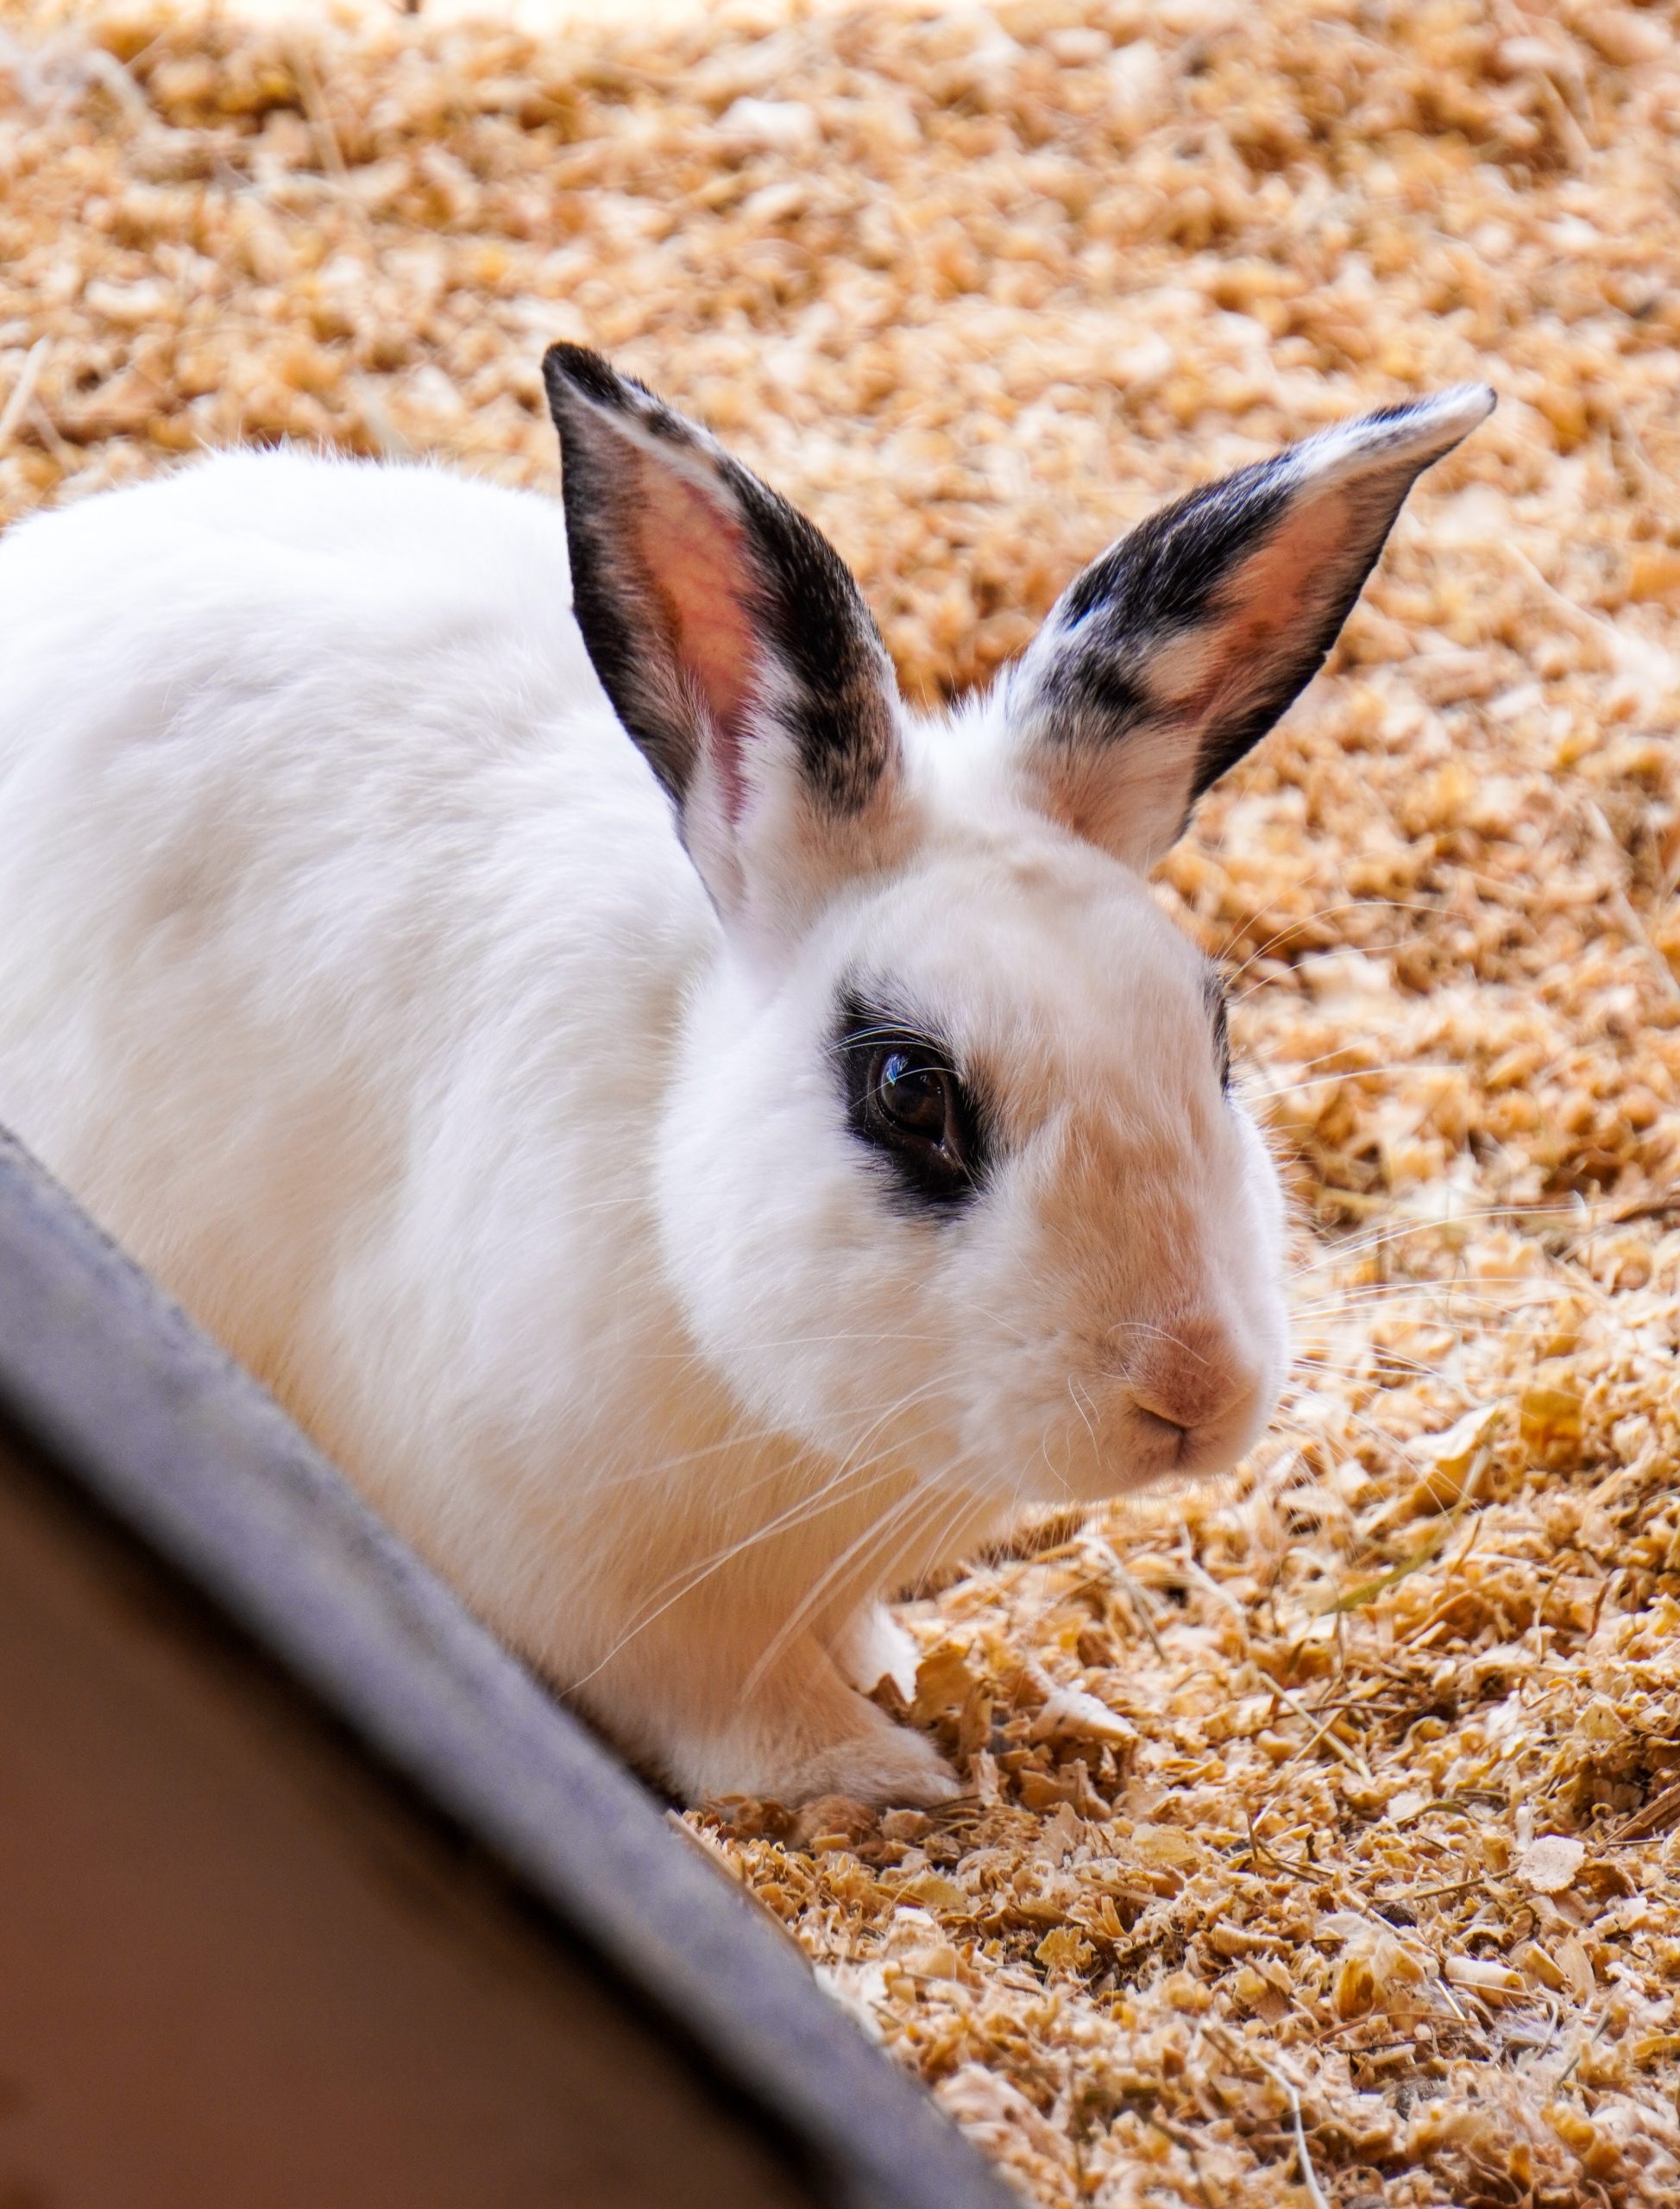 Rabbit Farming: A Lucrative Opportunity cats claw fasteners rabbit on farm